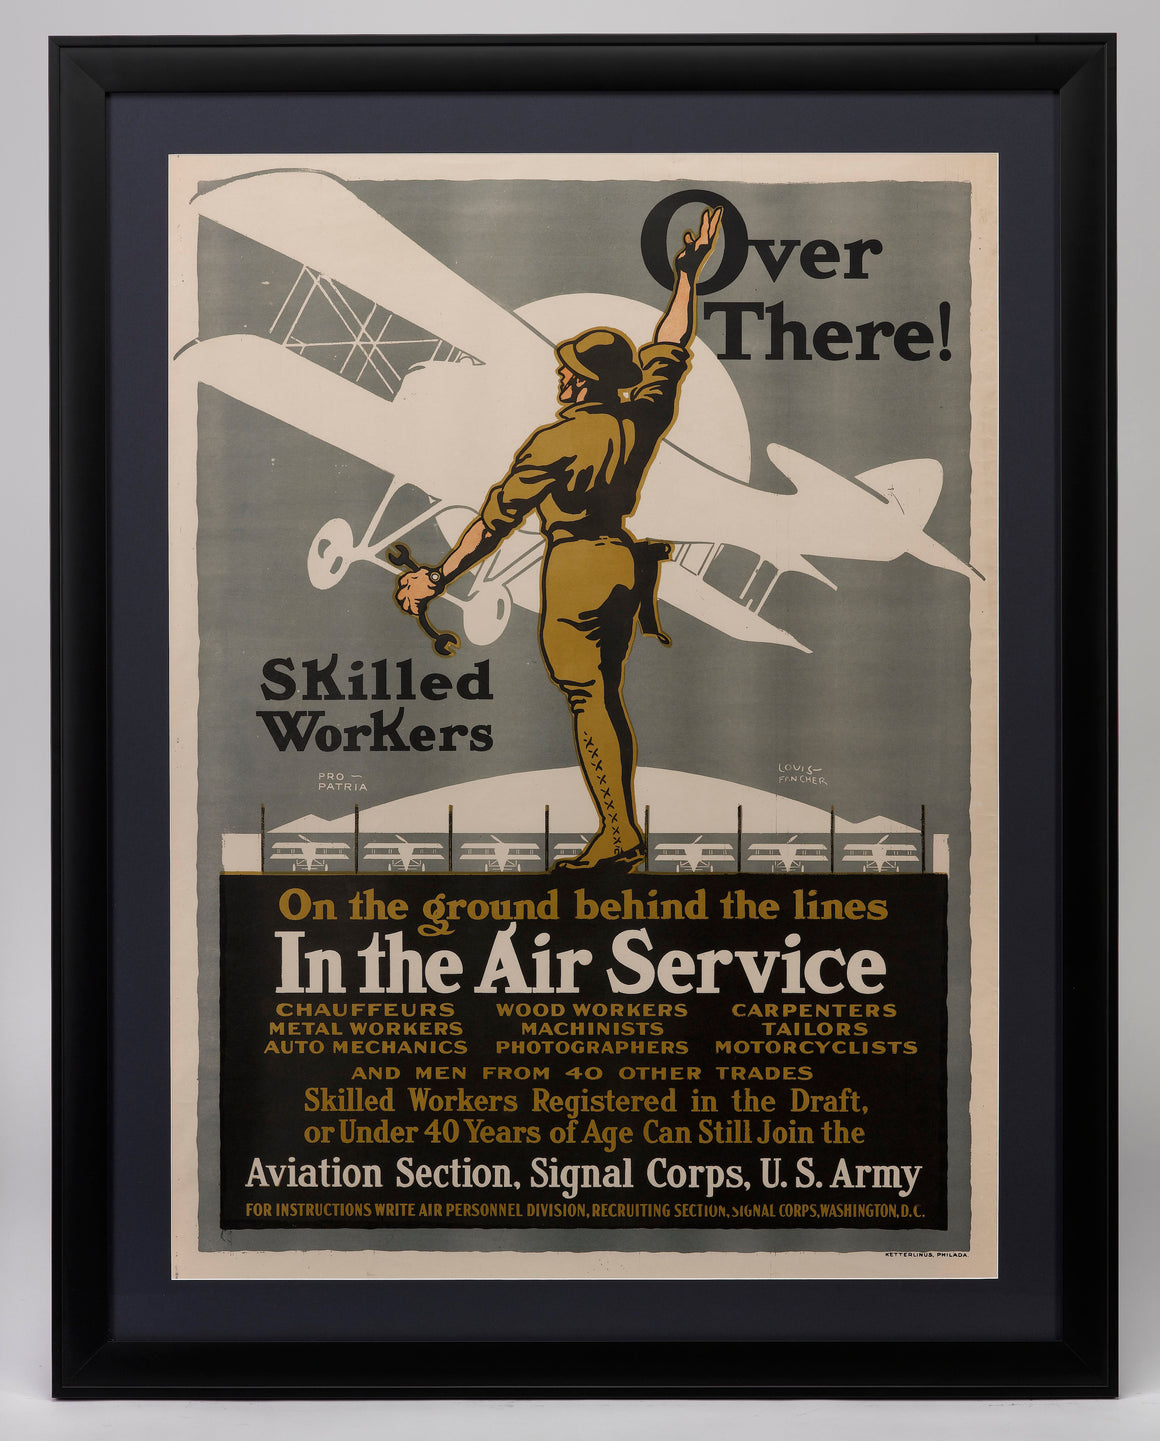 "Over There! In the Air Service" Vintage WWI U.S. Army Signal Corps Recruitment Poster by Louis Fancher, 1918